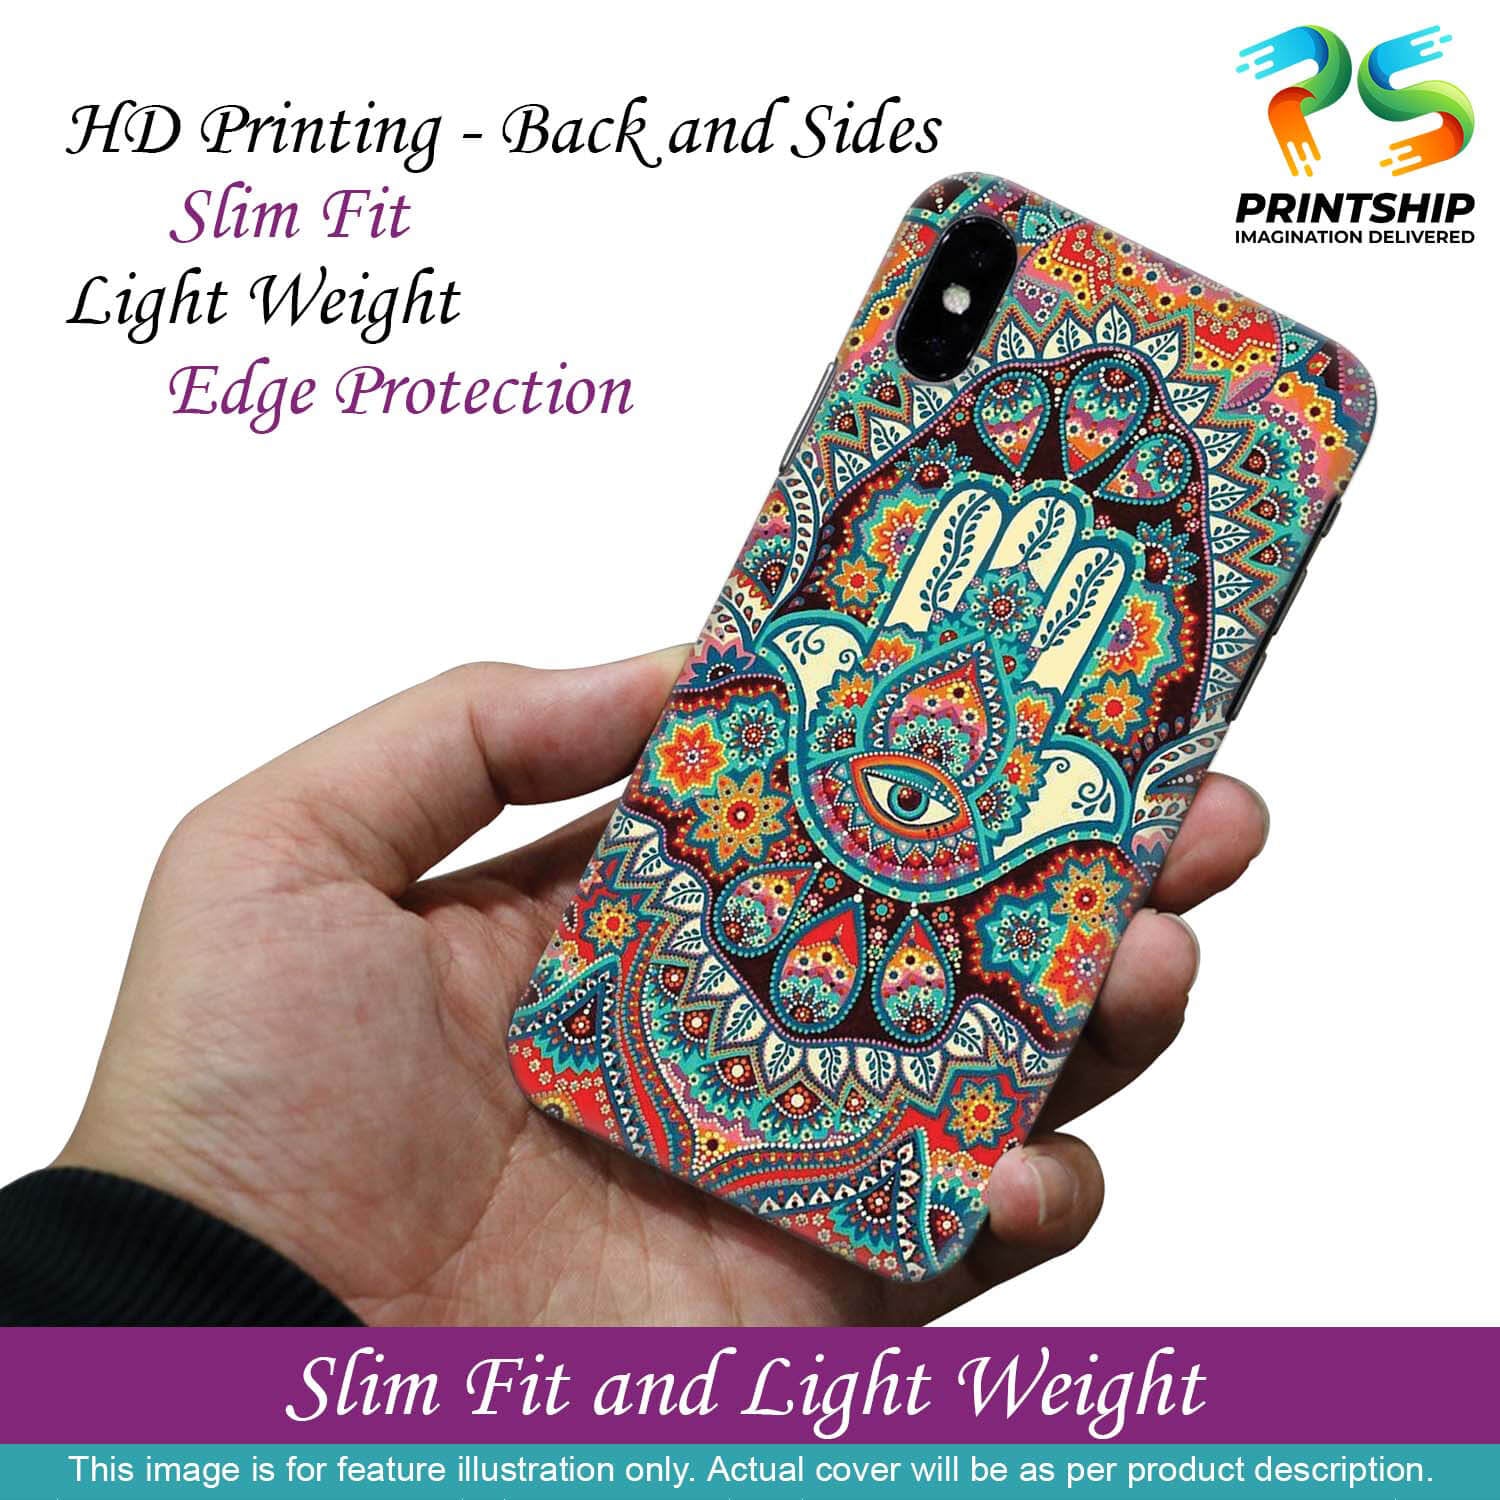 PS1336-Eye Hands Mandala Back Cover for Xiaomi Redmi Note 9S